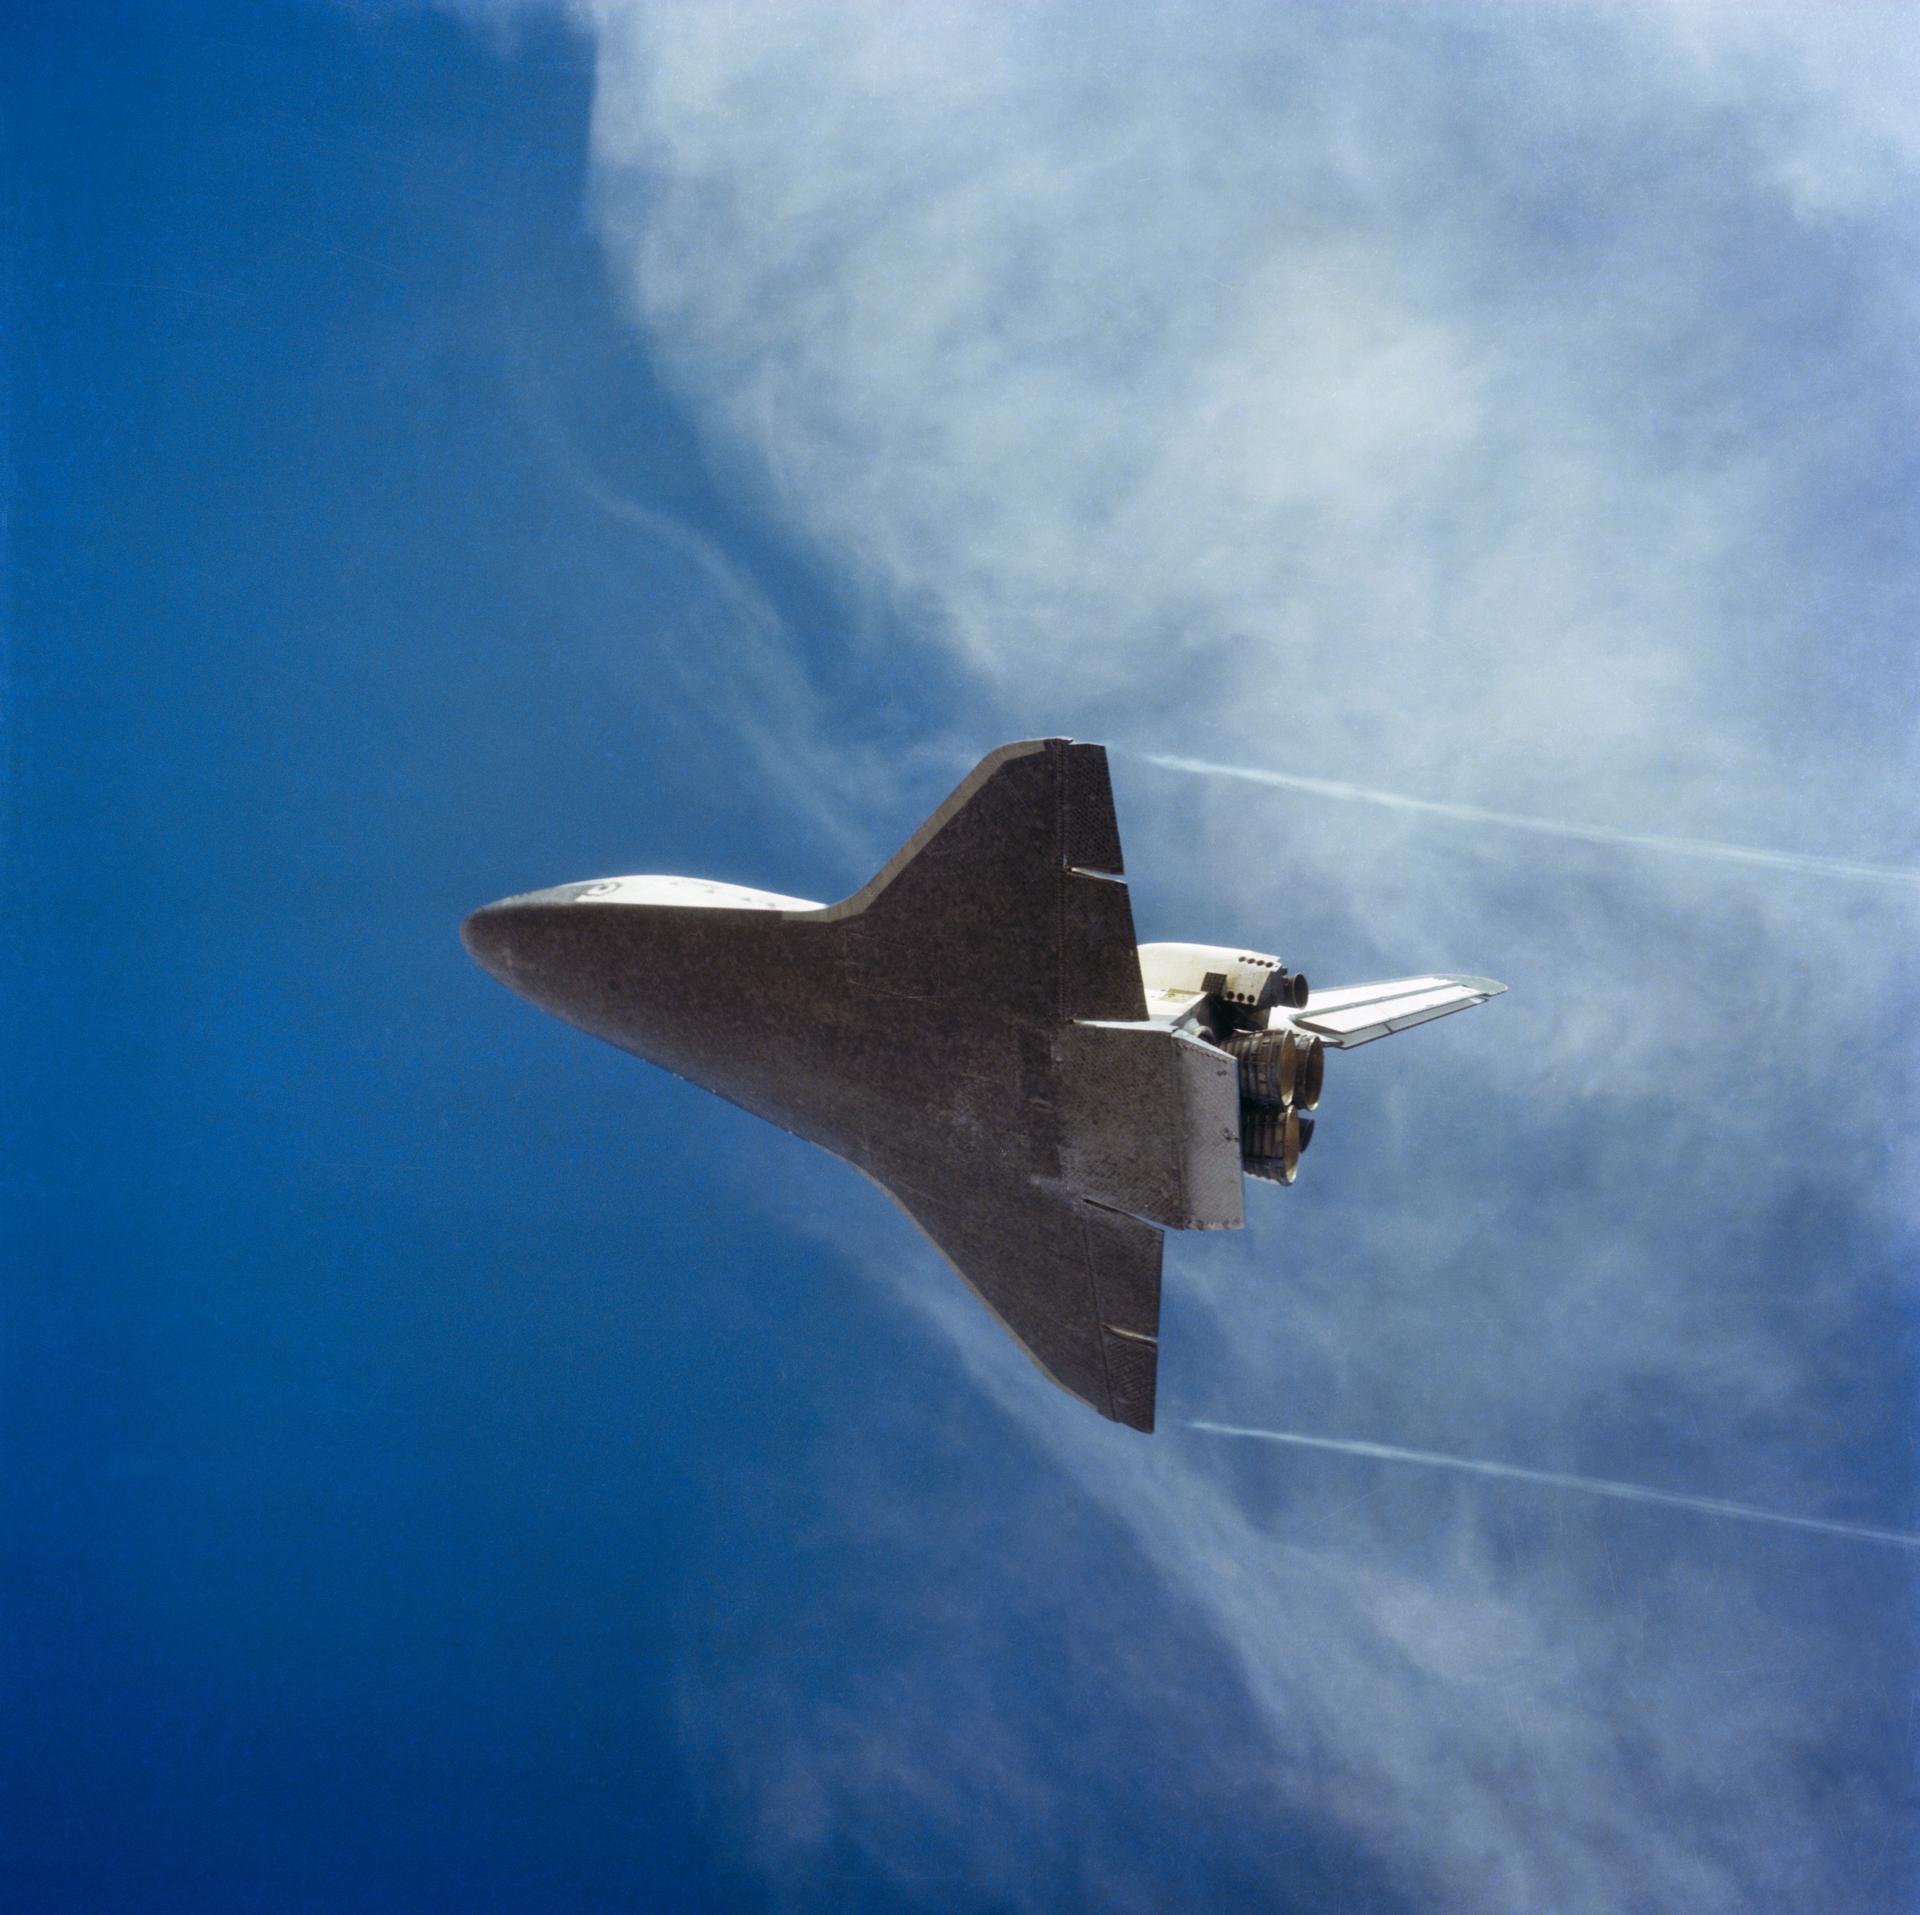 Space Shuttle Columbia (STS-2) is seen from below just before landing with the blue sky and wispy clouds visible in the background.